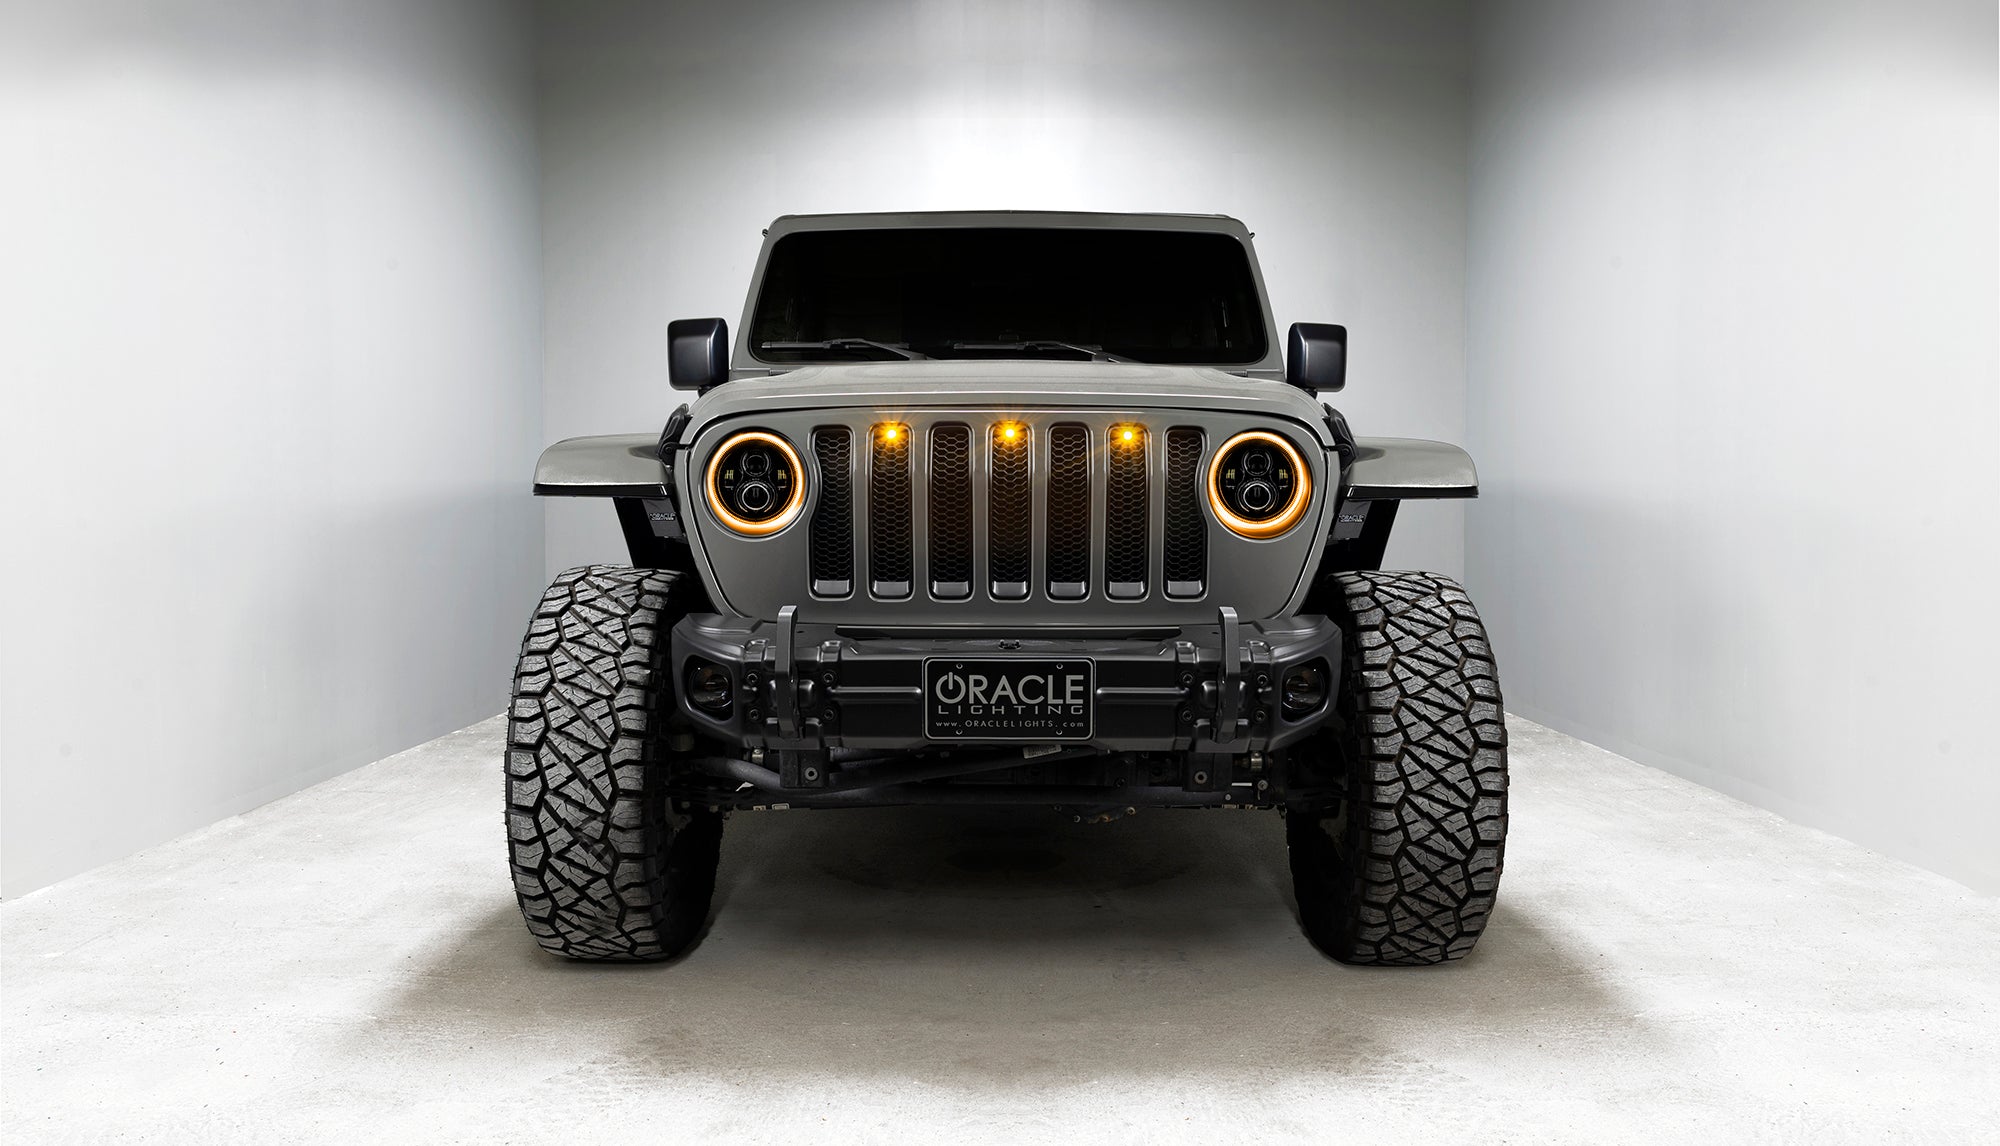 Jeep Wrangler JL/Gladiator JT 7in. High Powered LED Headlights (Pair)